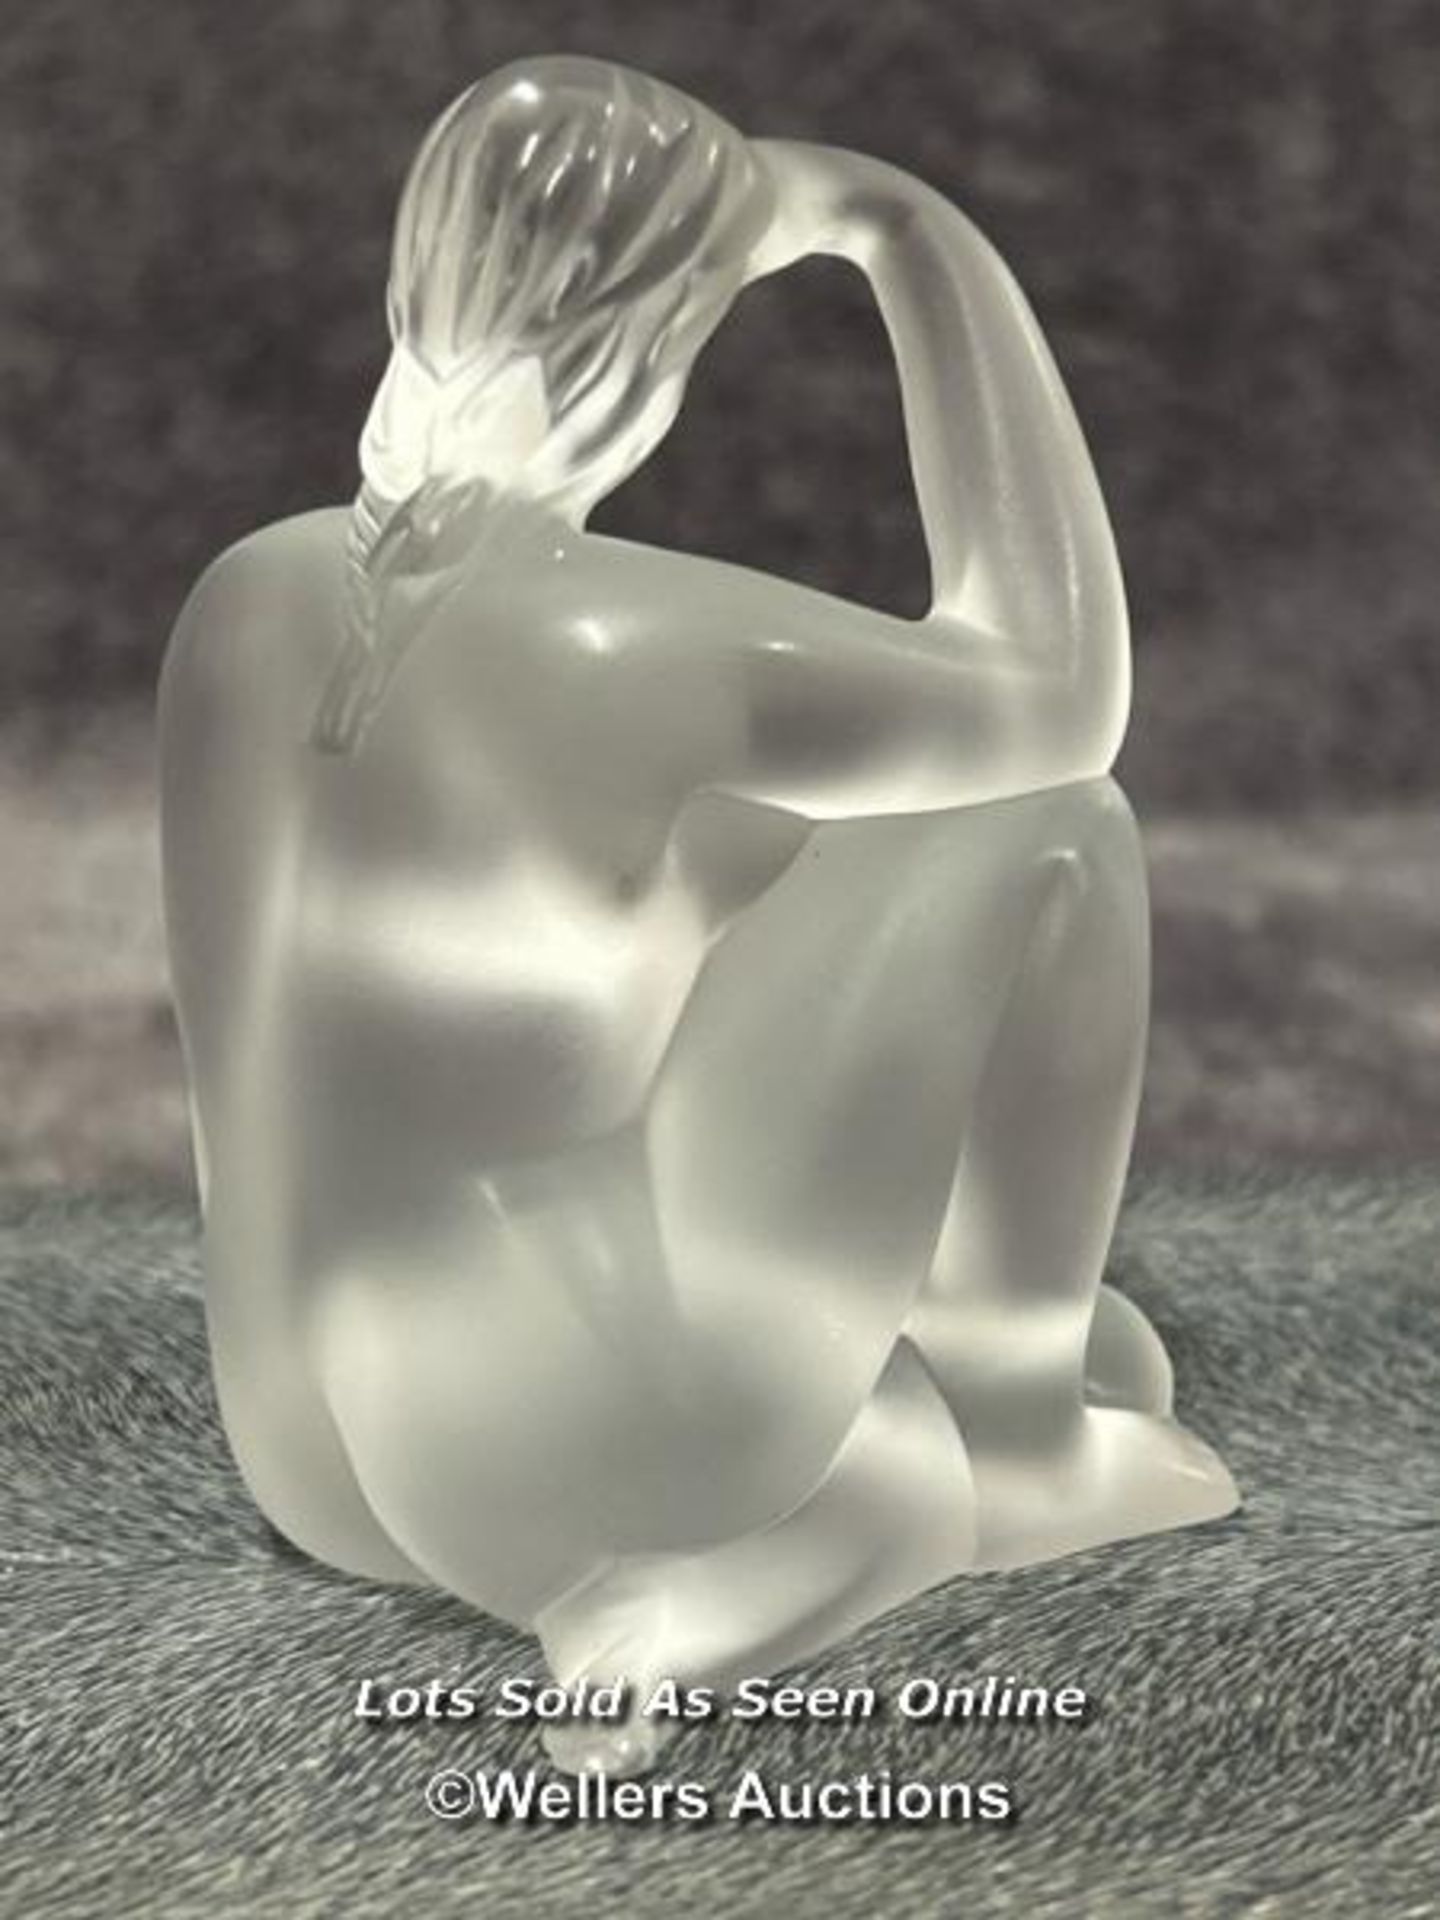 Lalique frosted crystal figurine of a seated woman in "thinking" pose, 8.5cm high / AN2 - Image 2 of 3